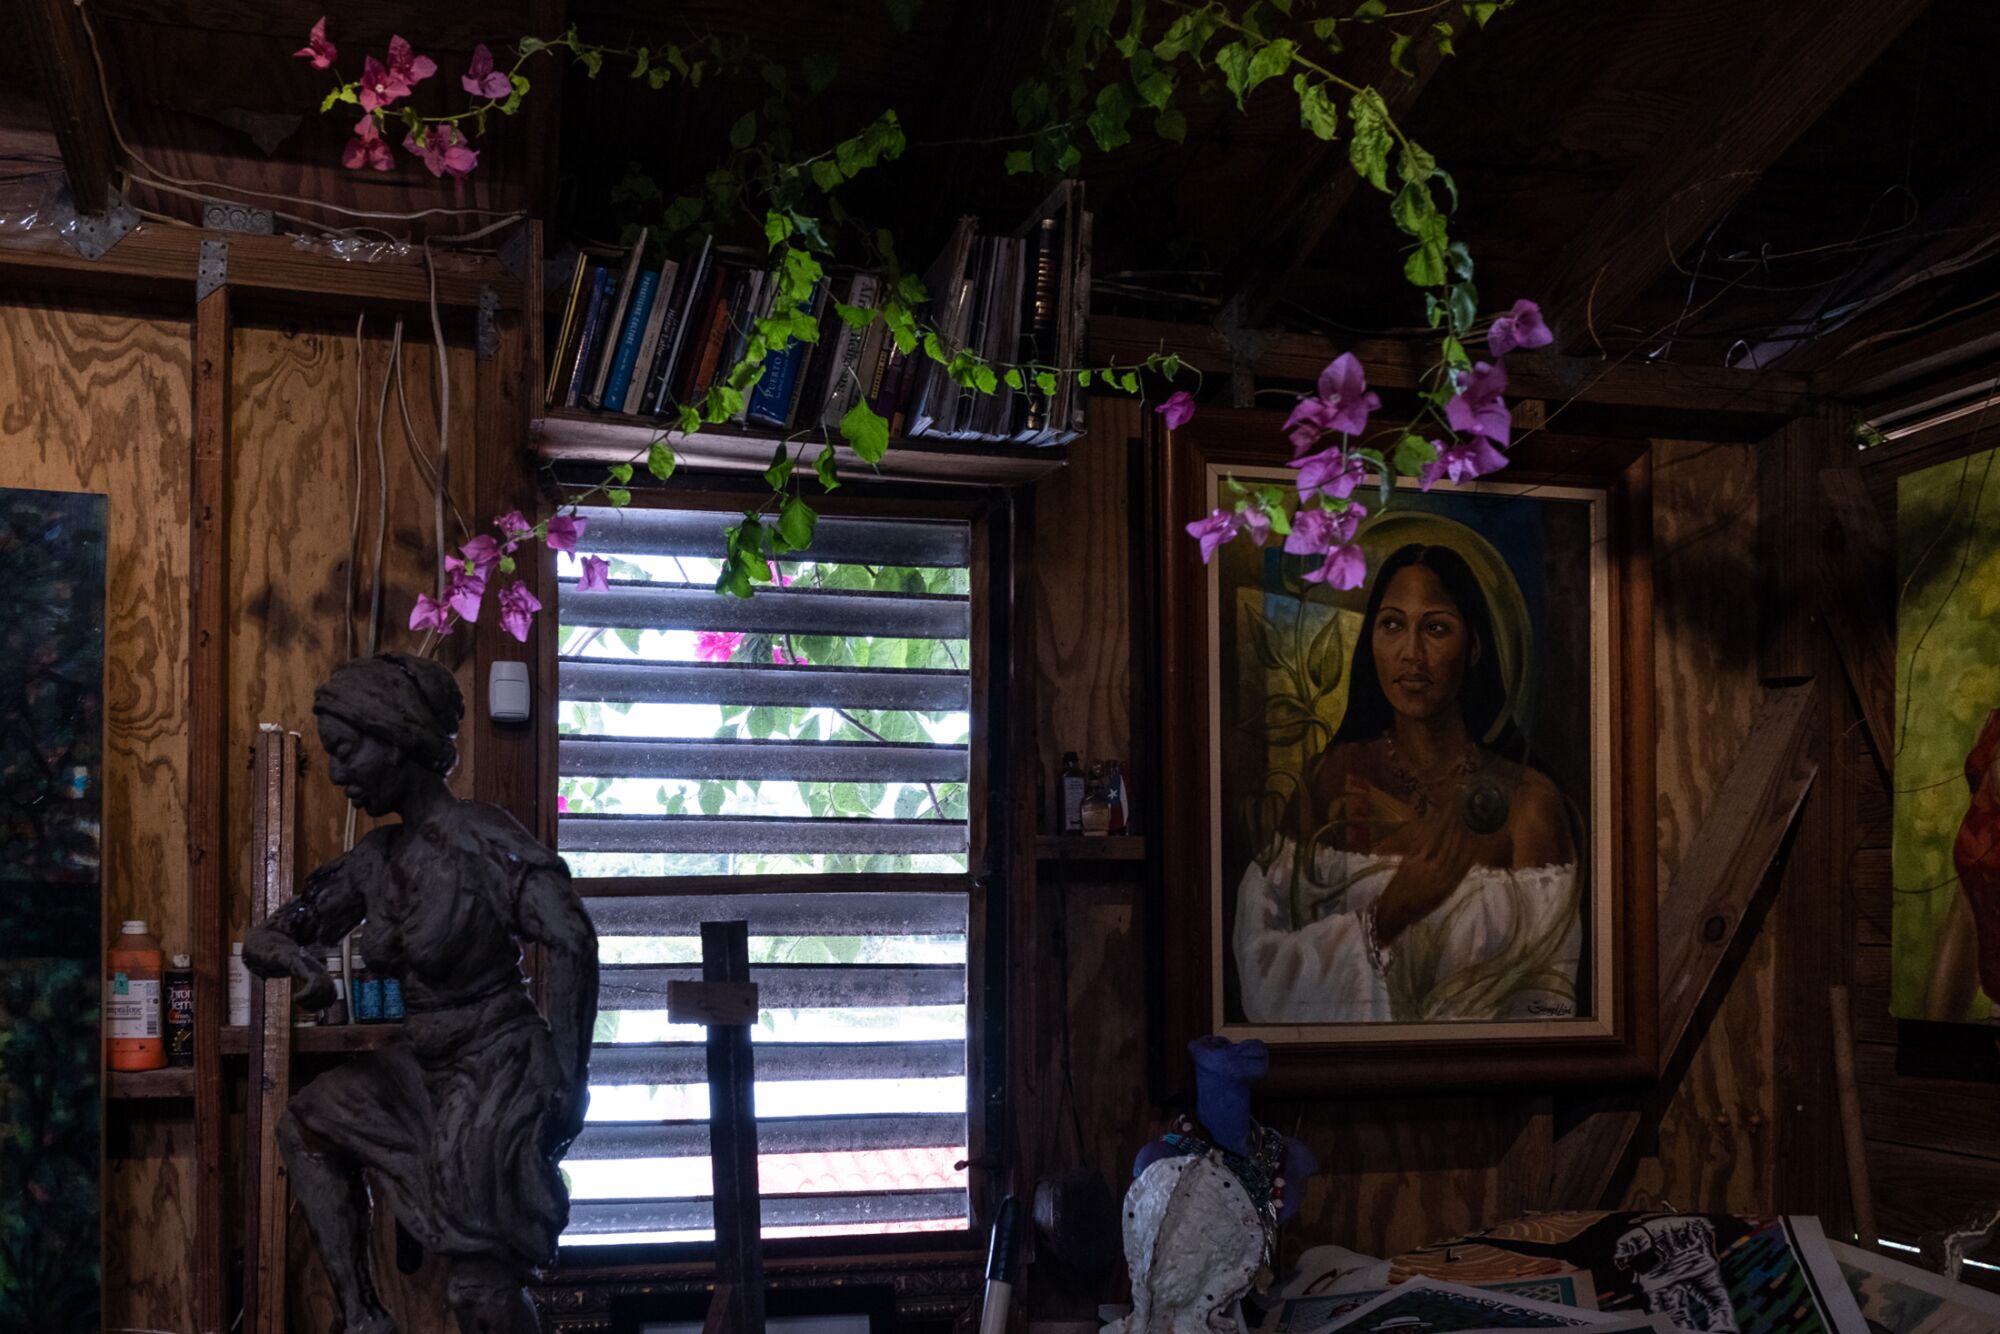 Bougainvillea drapes over a window next to a painting and a sculpture